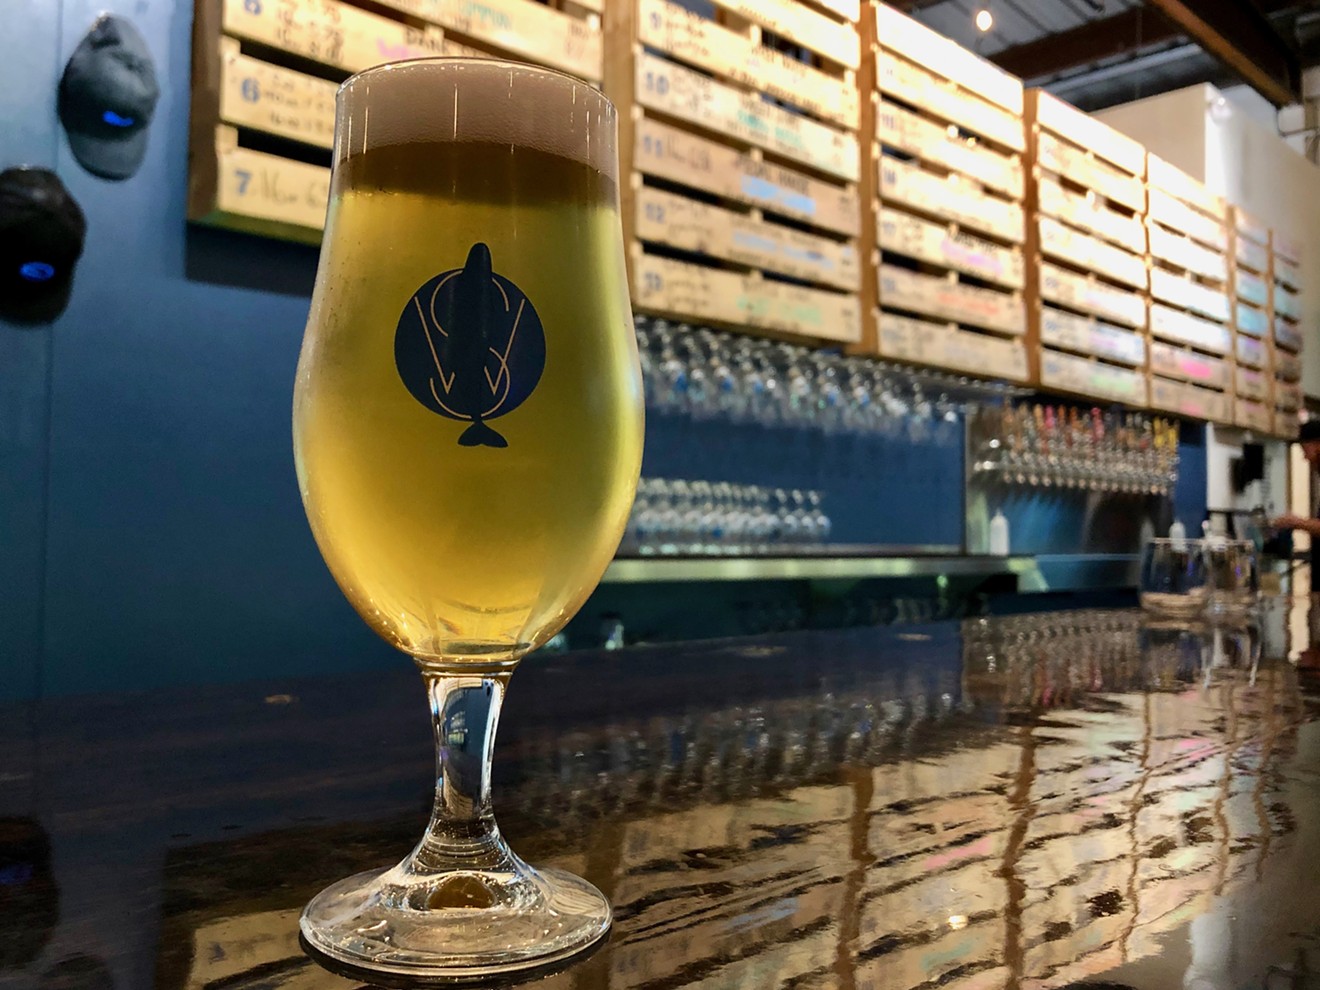 We've taken the liberty of listing the most exciting taprooms and beer shops in the Valley.